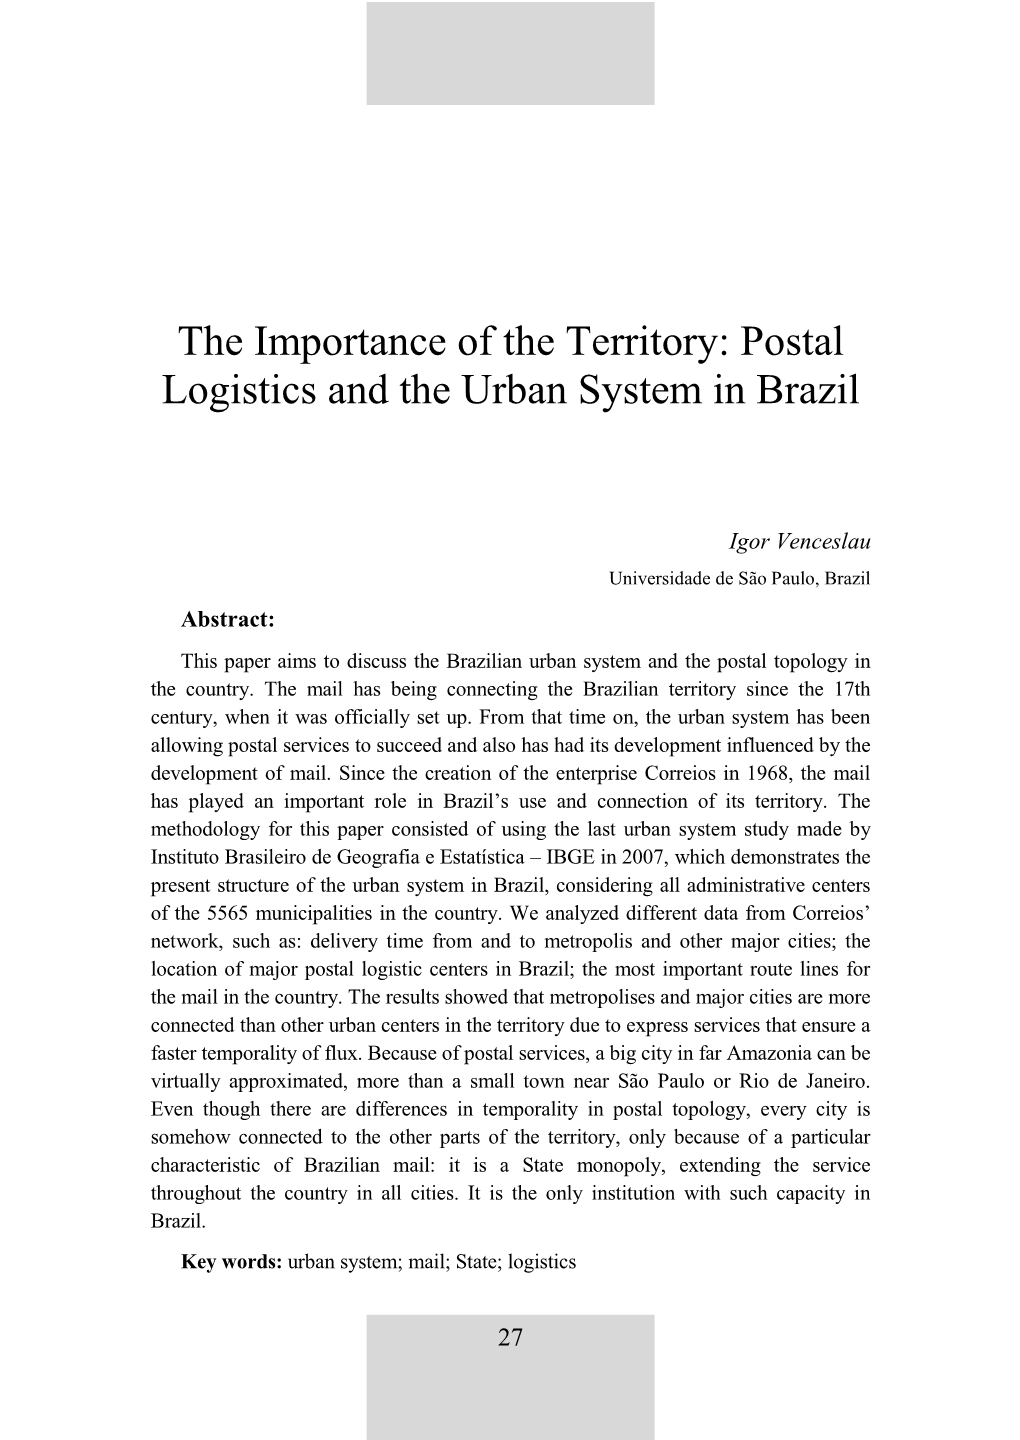 Postal Logistics and the Urban System in Brazil